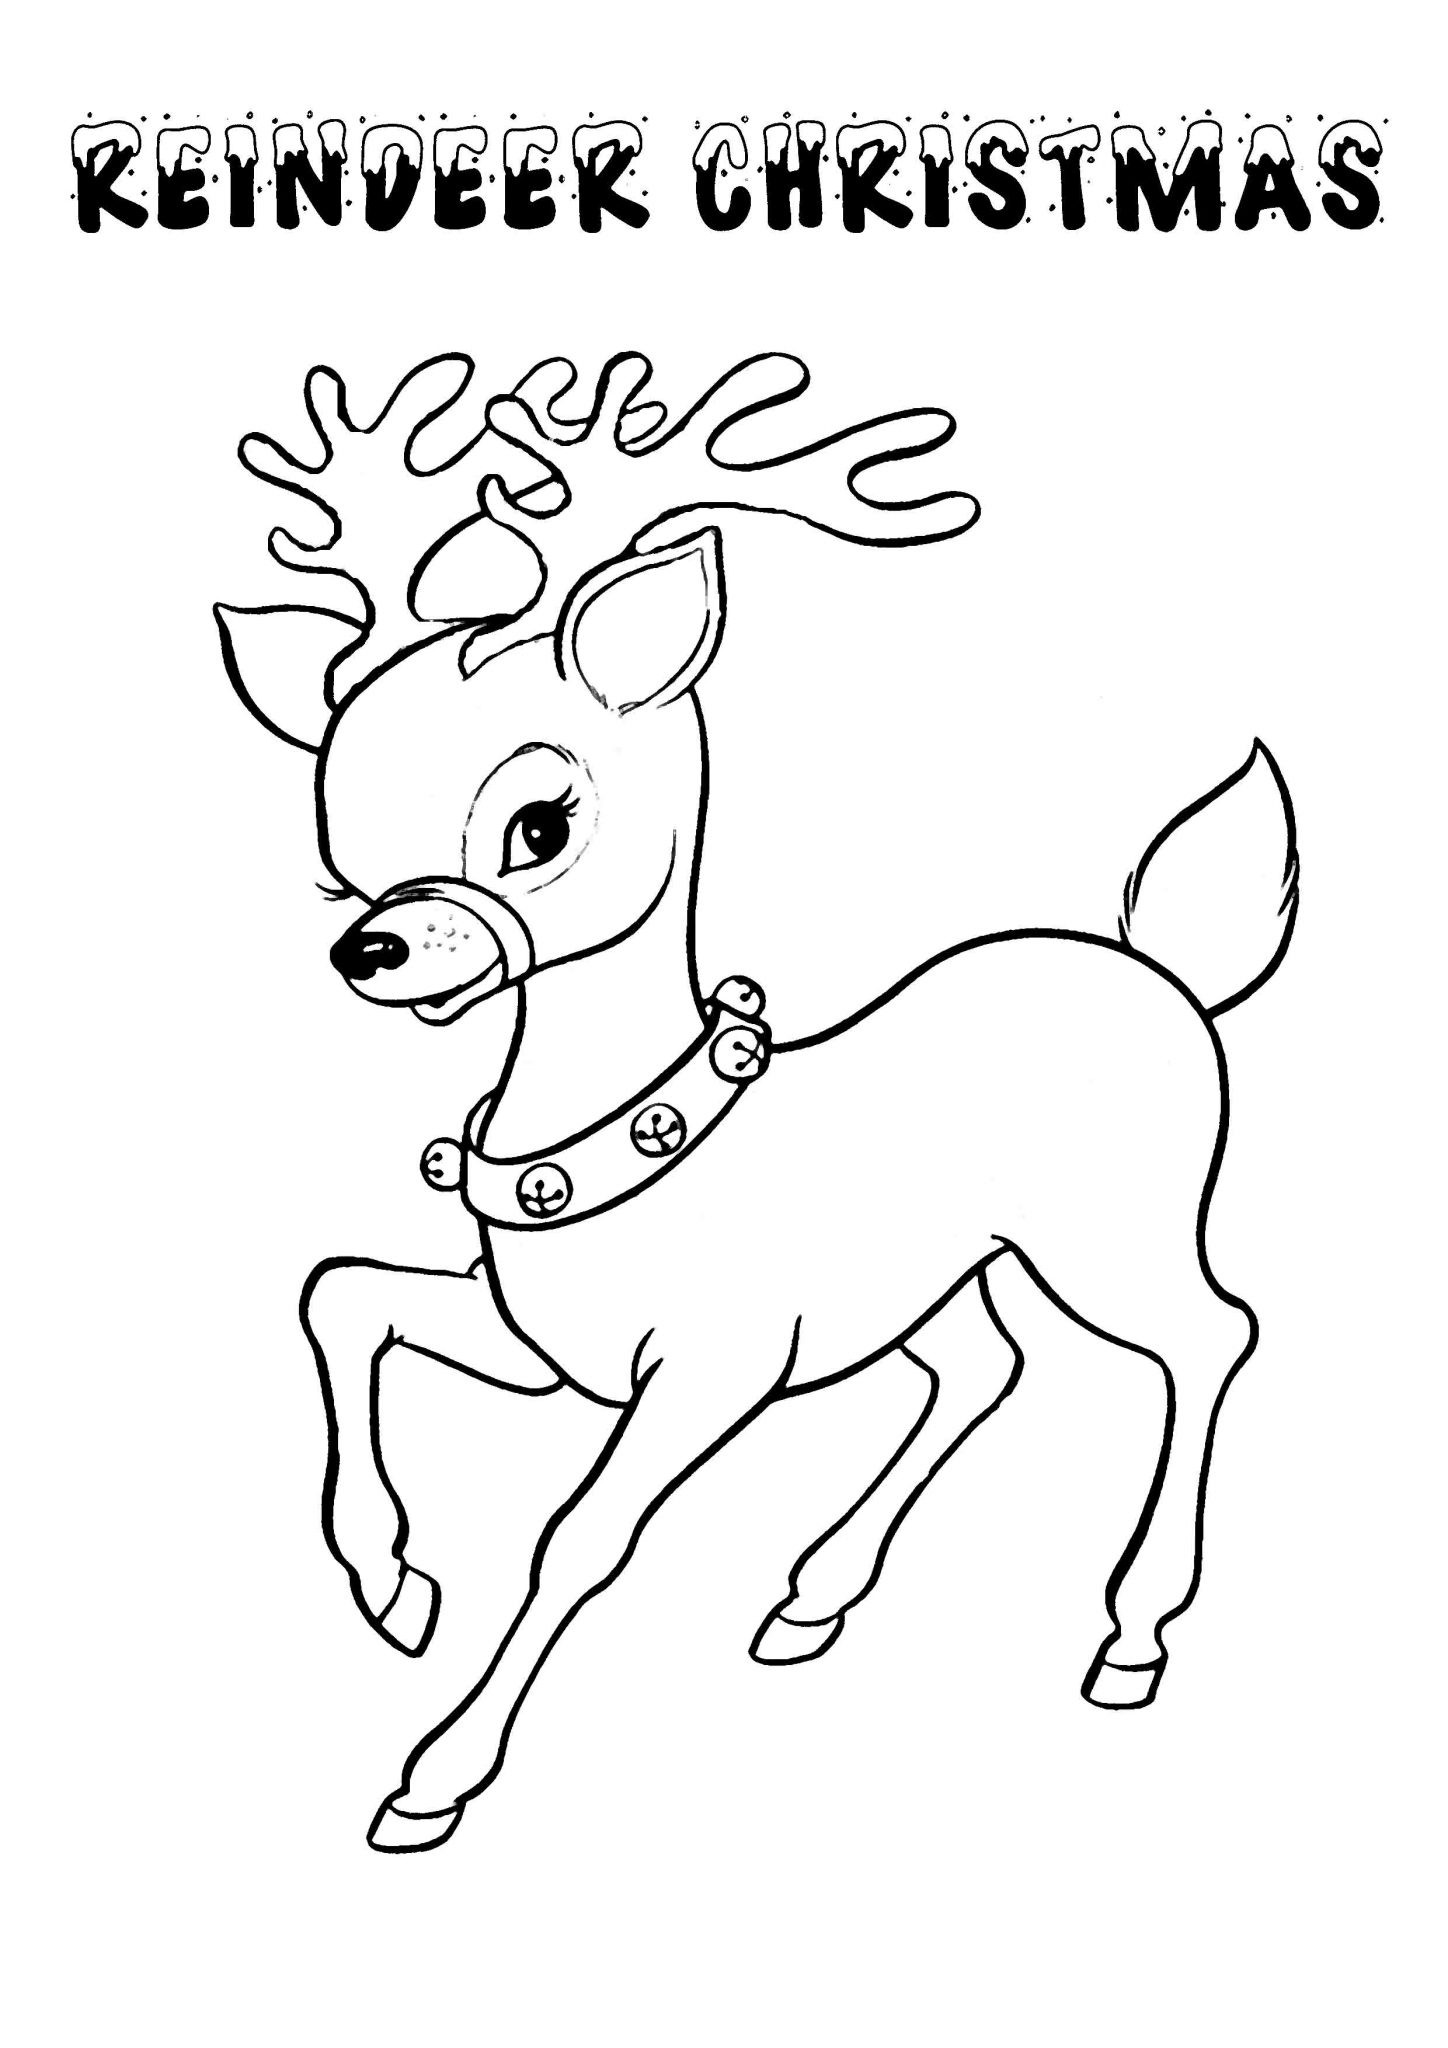 Toddler Christmas Coloring Pages
 Printable Christmas Coloring Pages for Kids – Best Apps